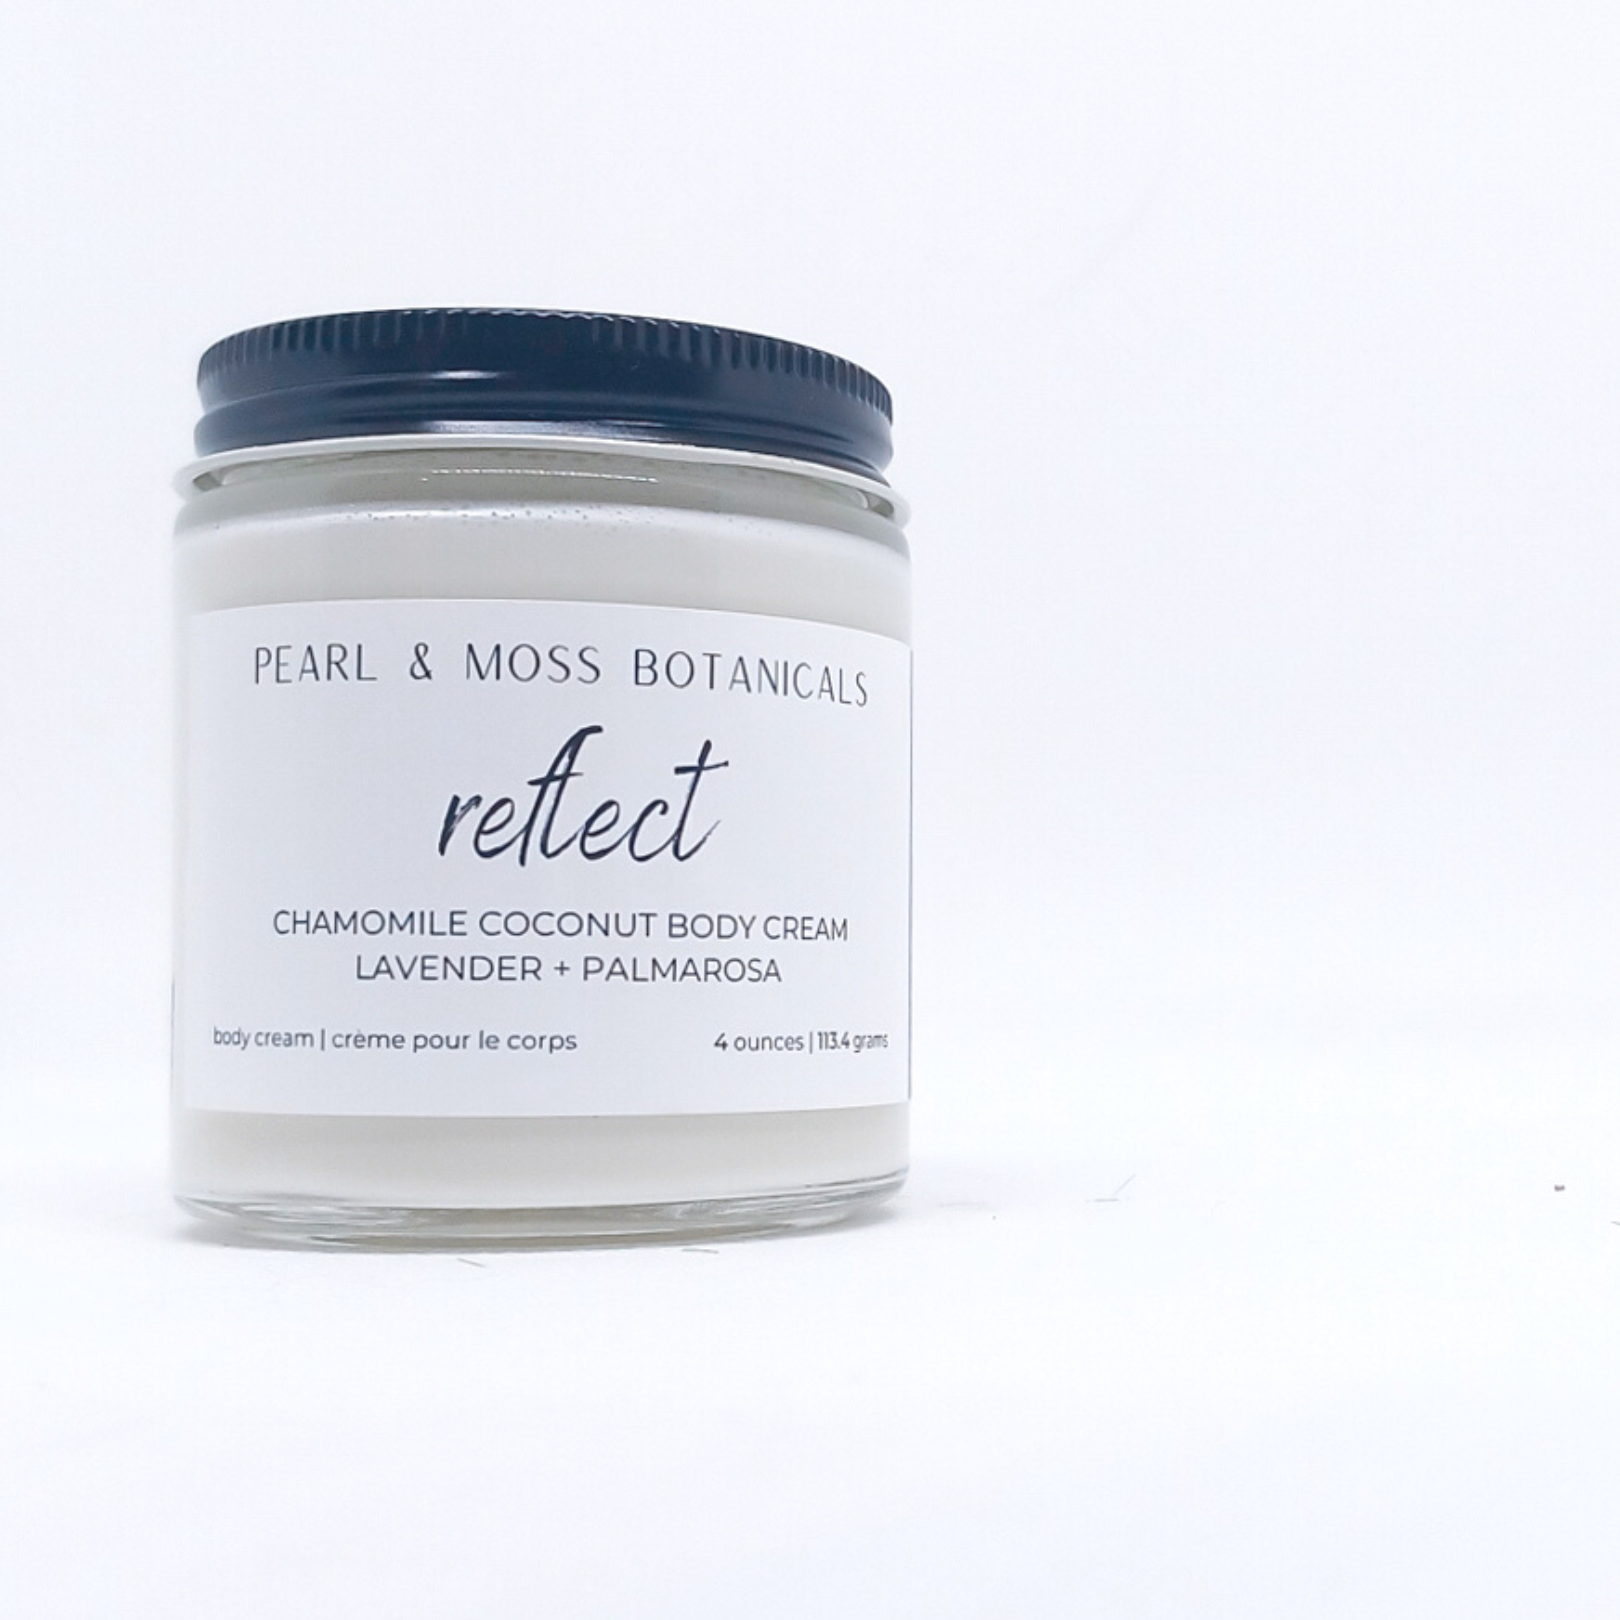 REFLECT: REFLECT is a calming combination of lavender and palmarosa essential oils.  Light and smooth, the Chamomile Coconut Body Cream is softening and conditioning for the skin, with extra soothing effects from chamomile extract. Rich and luxurious, tucuma and babassu butter shine in this body cream, bringing a velvety smooth finish to your skin, while providing delicious hydration to your skin, courtesy of coconut water.